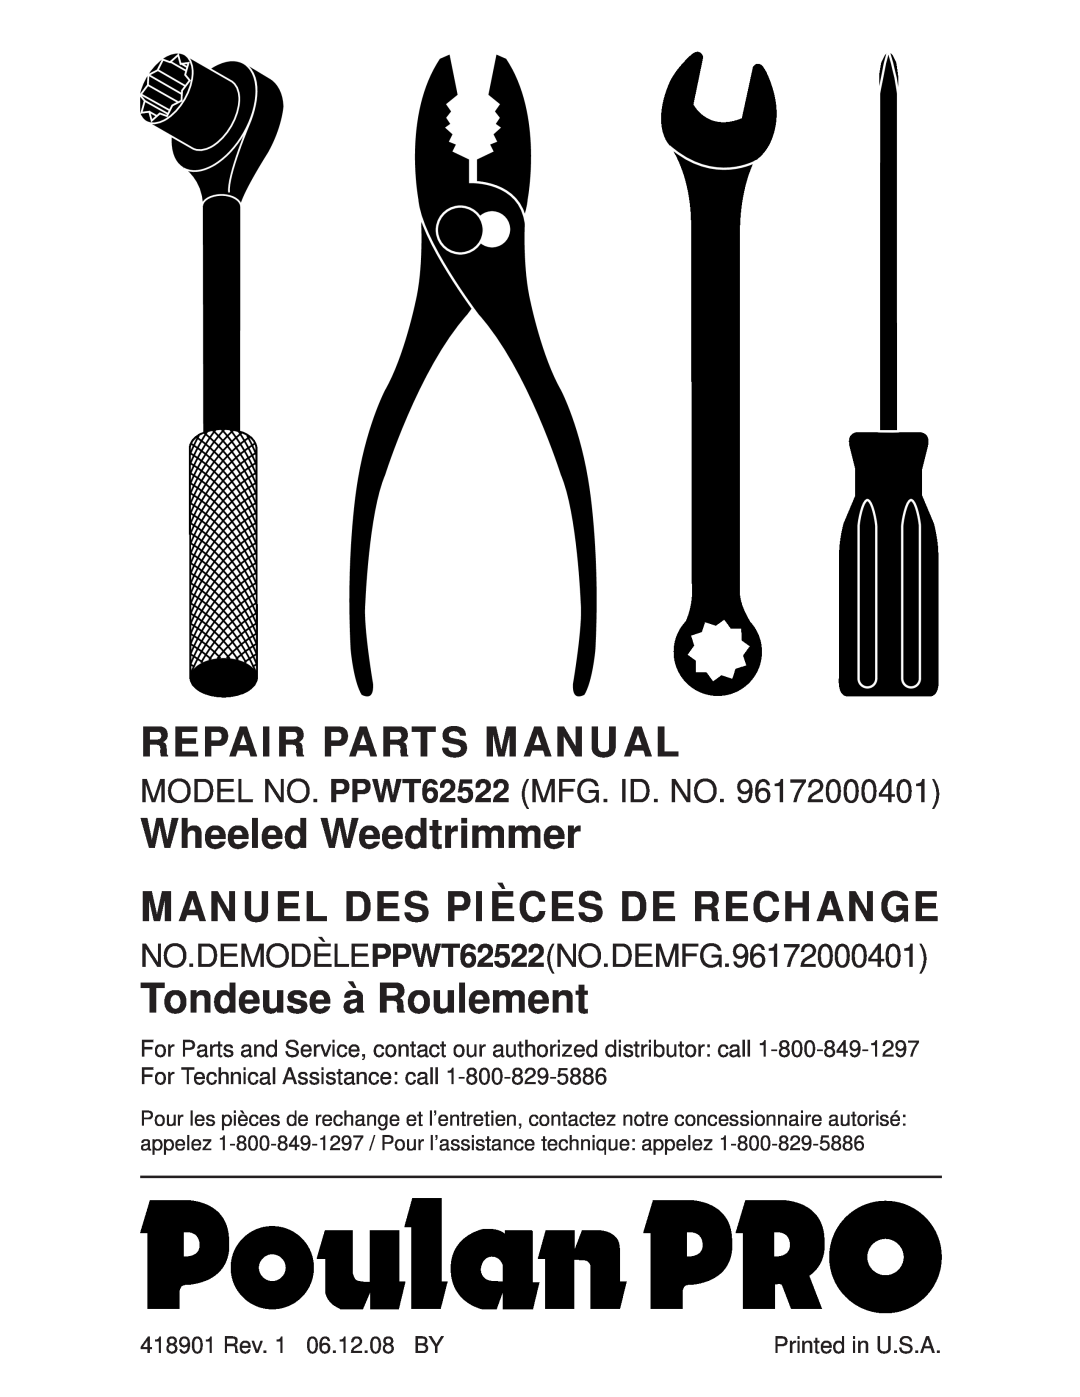 Poulan 96172000401, PPWT62522 manual For Technical Assistance call, 418901 Rev. 1 06.12.08 BY, Repair Parts Manual 